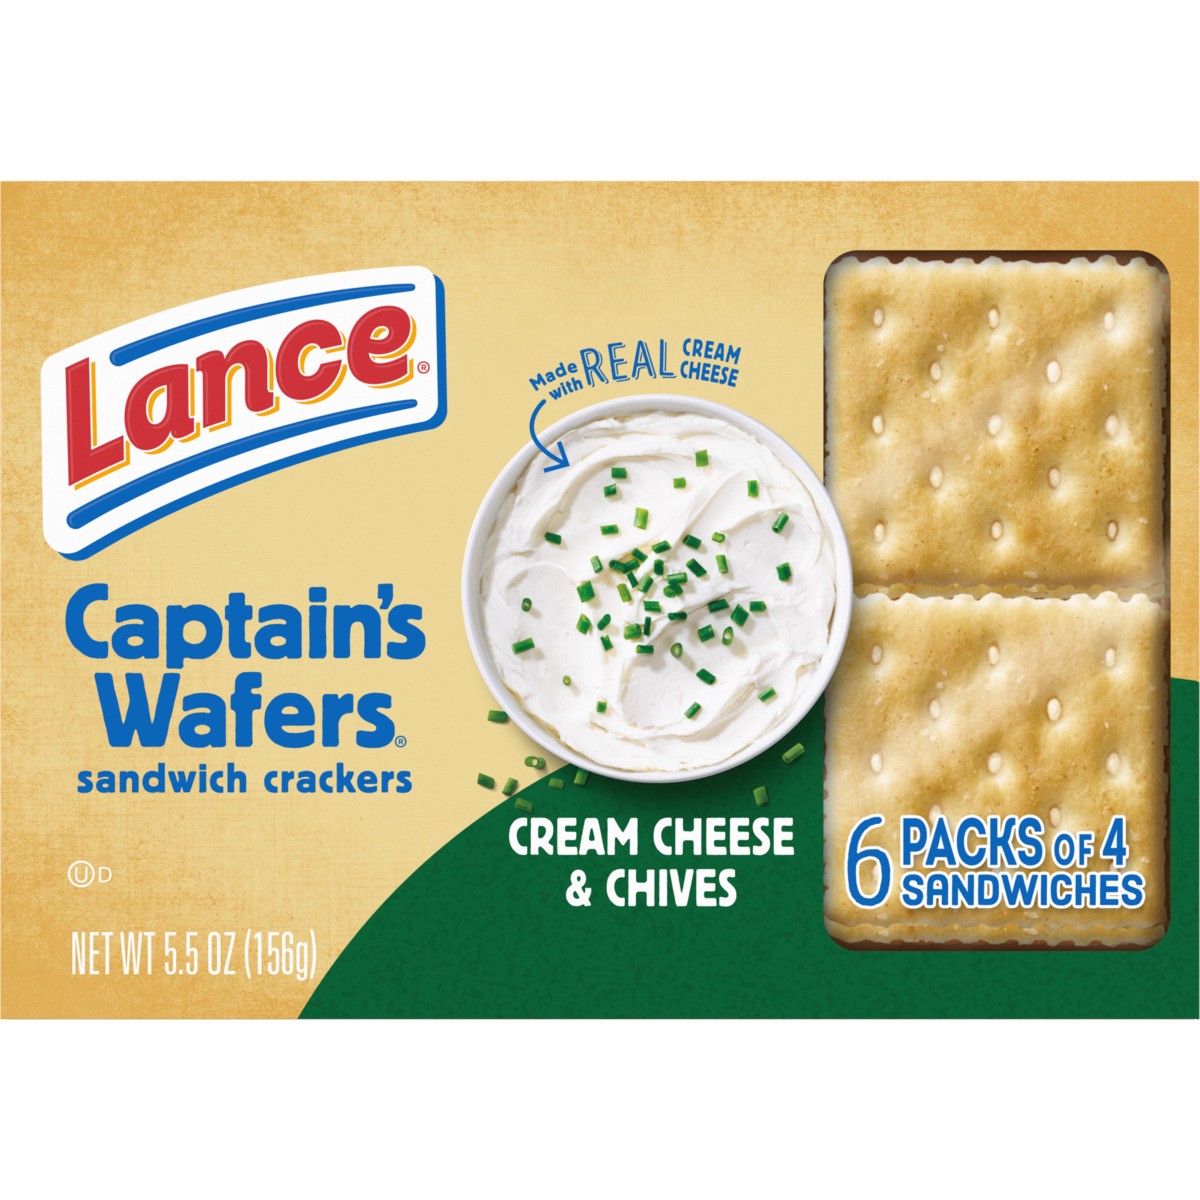 slide 4 of 11, Lance Sandwich Crackers, Captain's Wafers Cream Cheese and Chives, 6 Packs, 4 Sandwiches Each, 5.5 oz